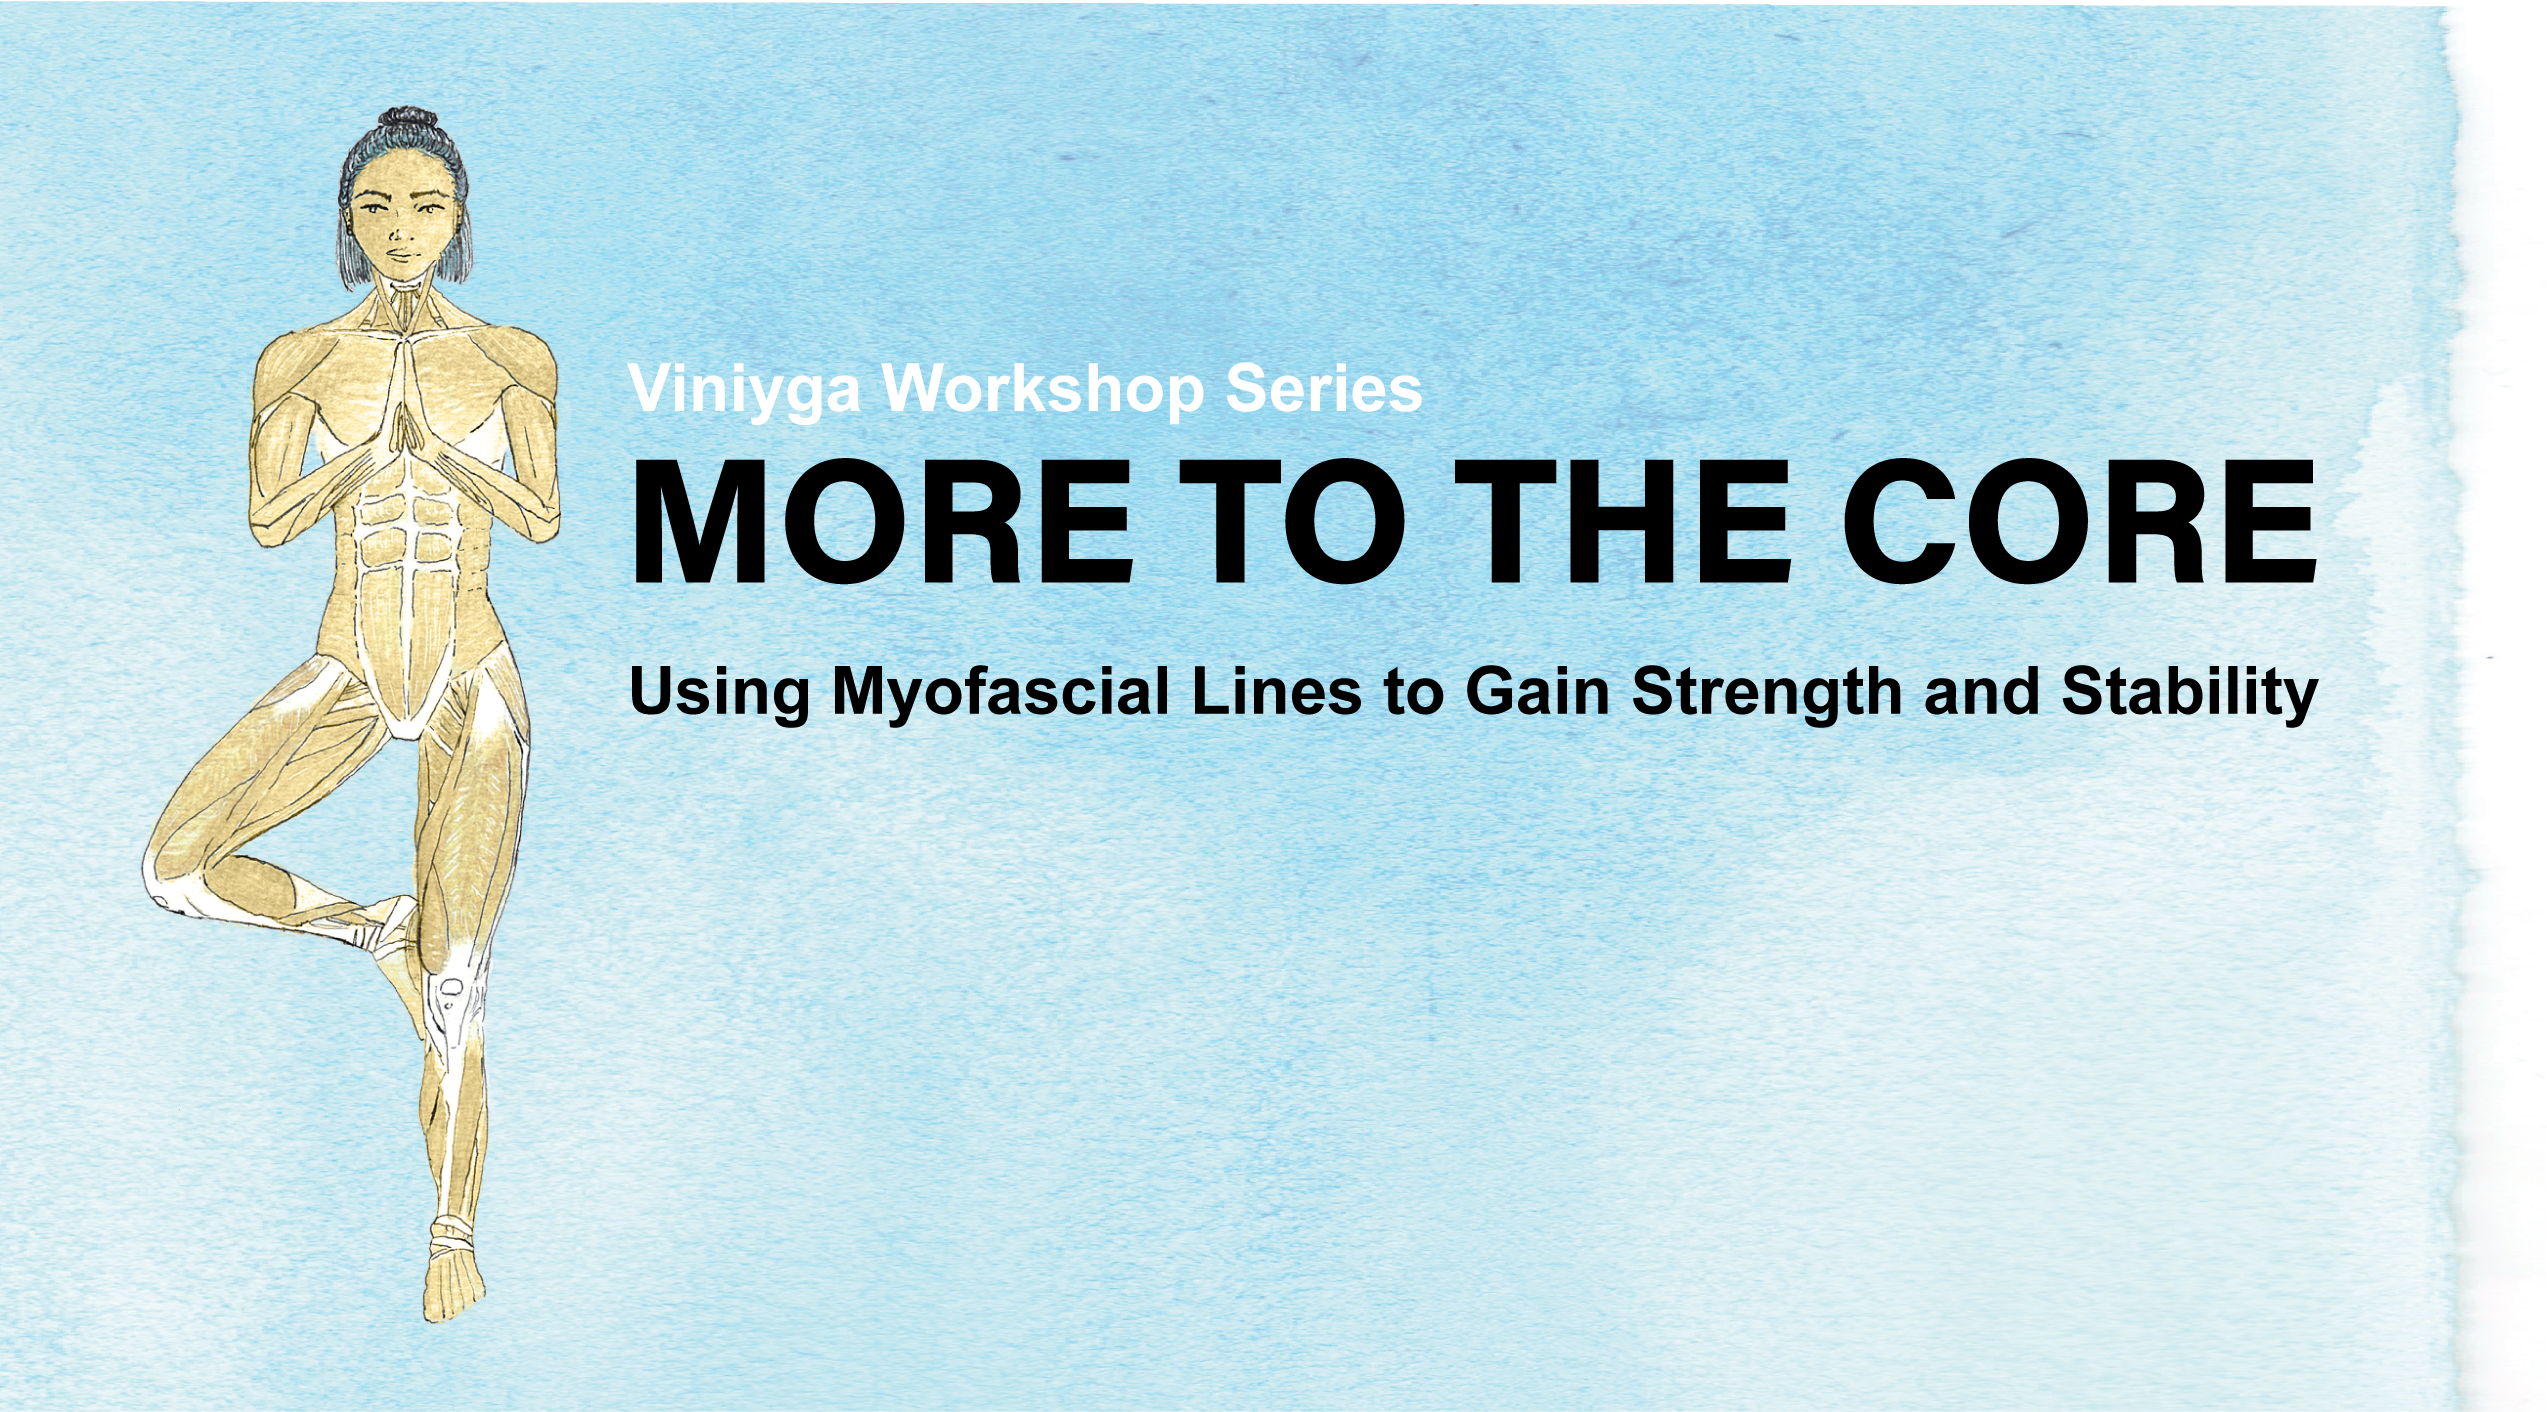 There's More to the Core: Using myofascial lines to gain strength and stability (with Liz Lacey-Gotz)